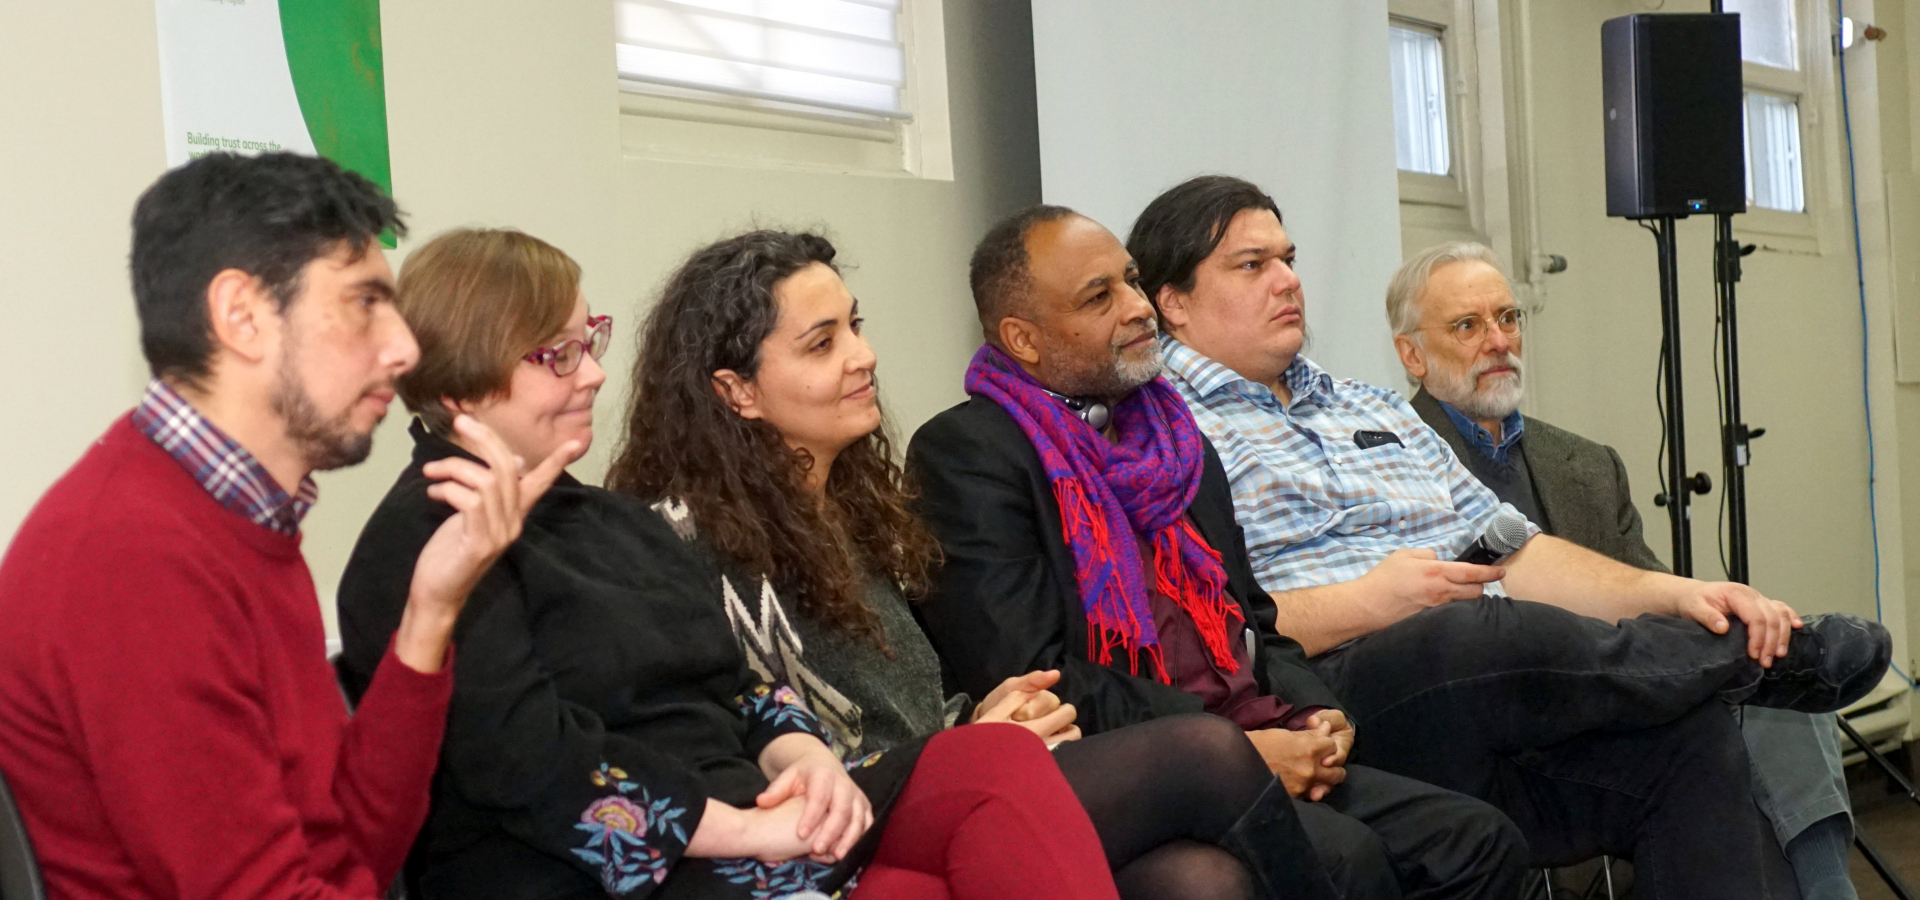 Six panelists, of different ages, genders, and ethnicities, look out over crowd of attendees,